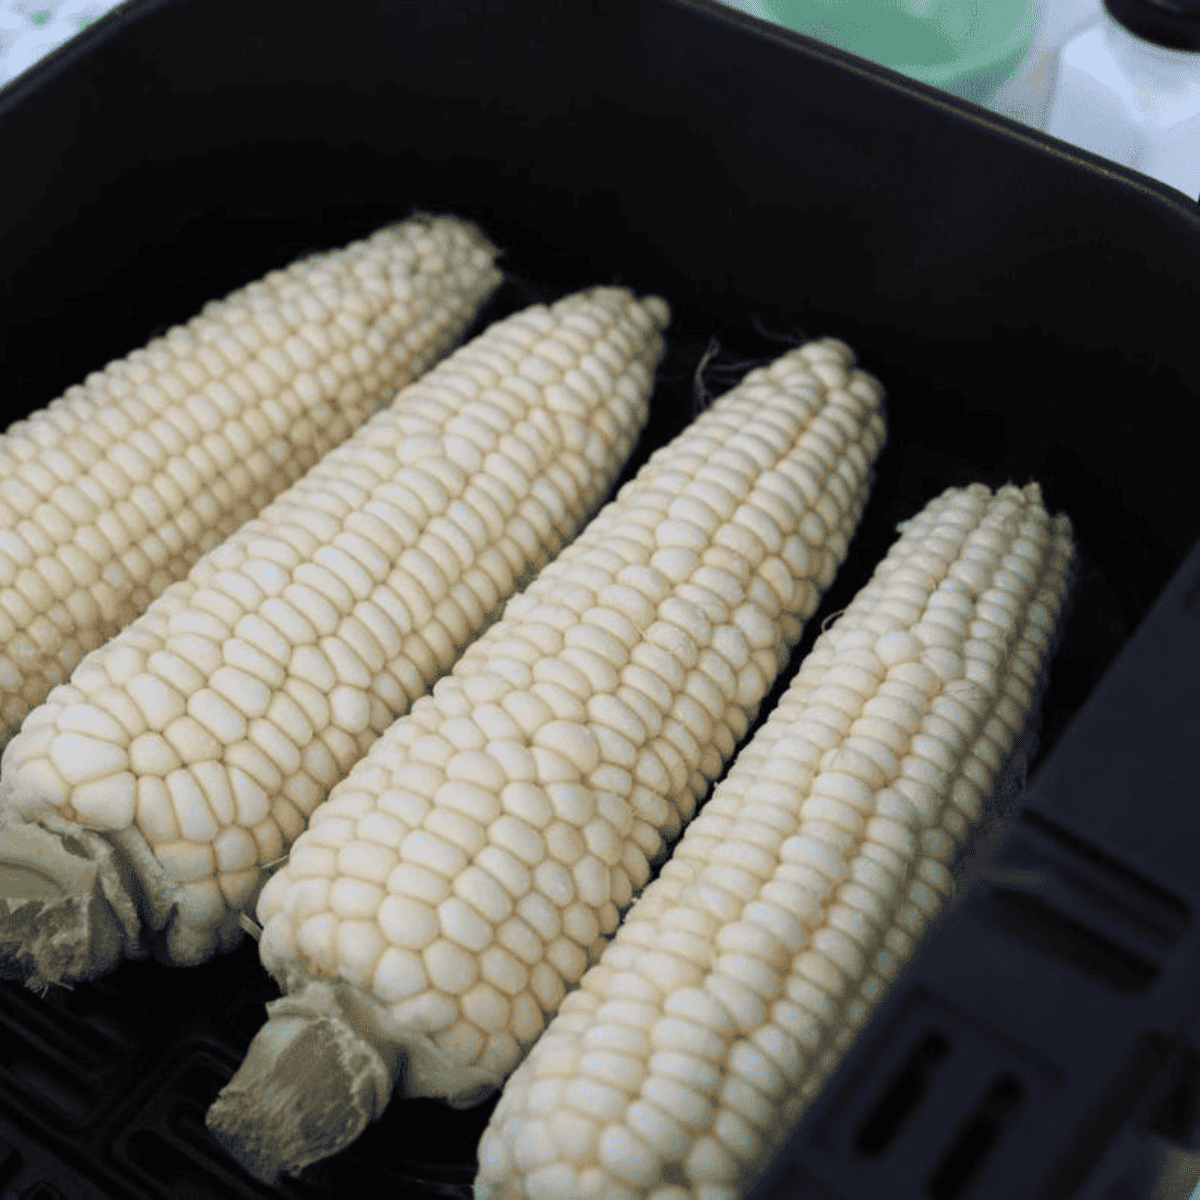 How To Air Fry Frozen Corn On The Cob